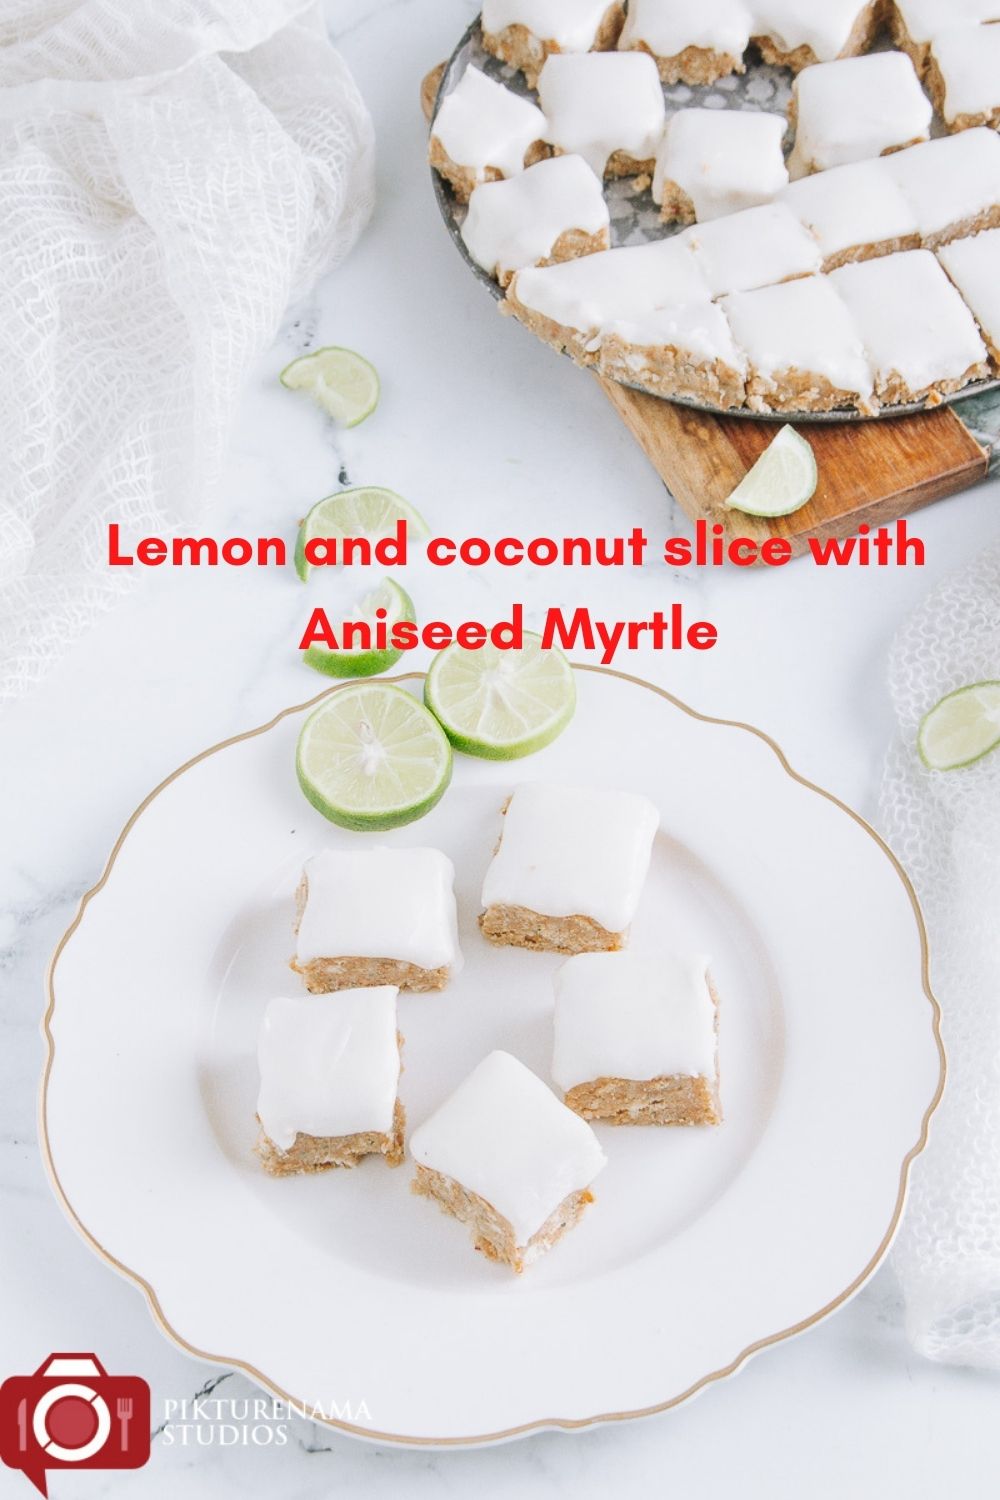 lemon and coconut slice with Aniseed Myrtle for Pinterest